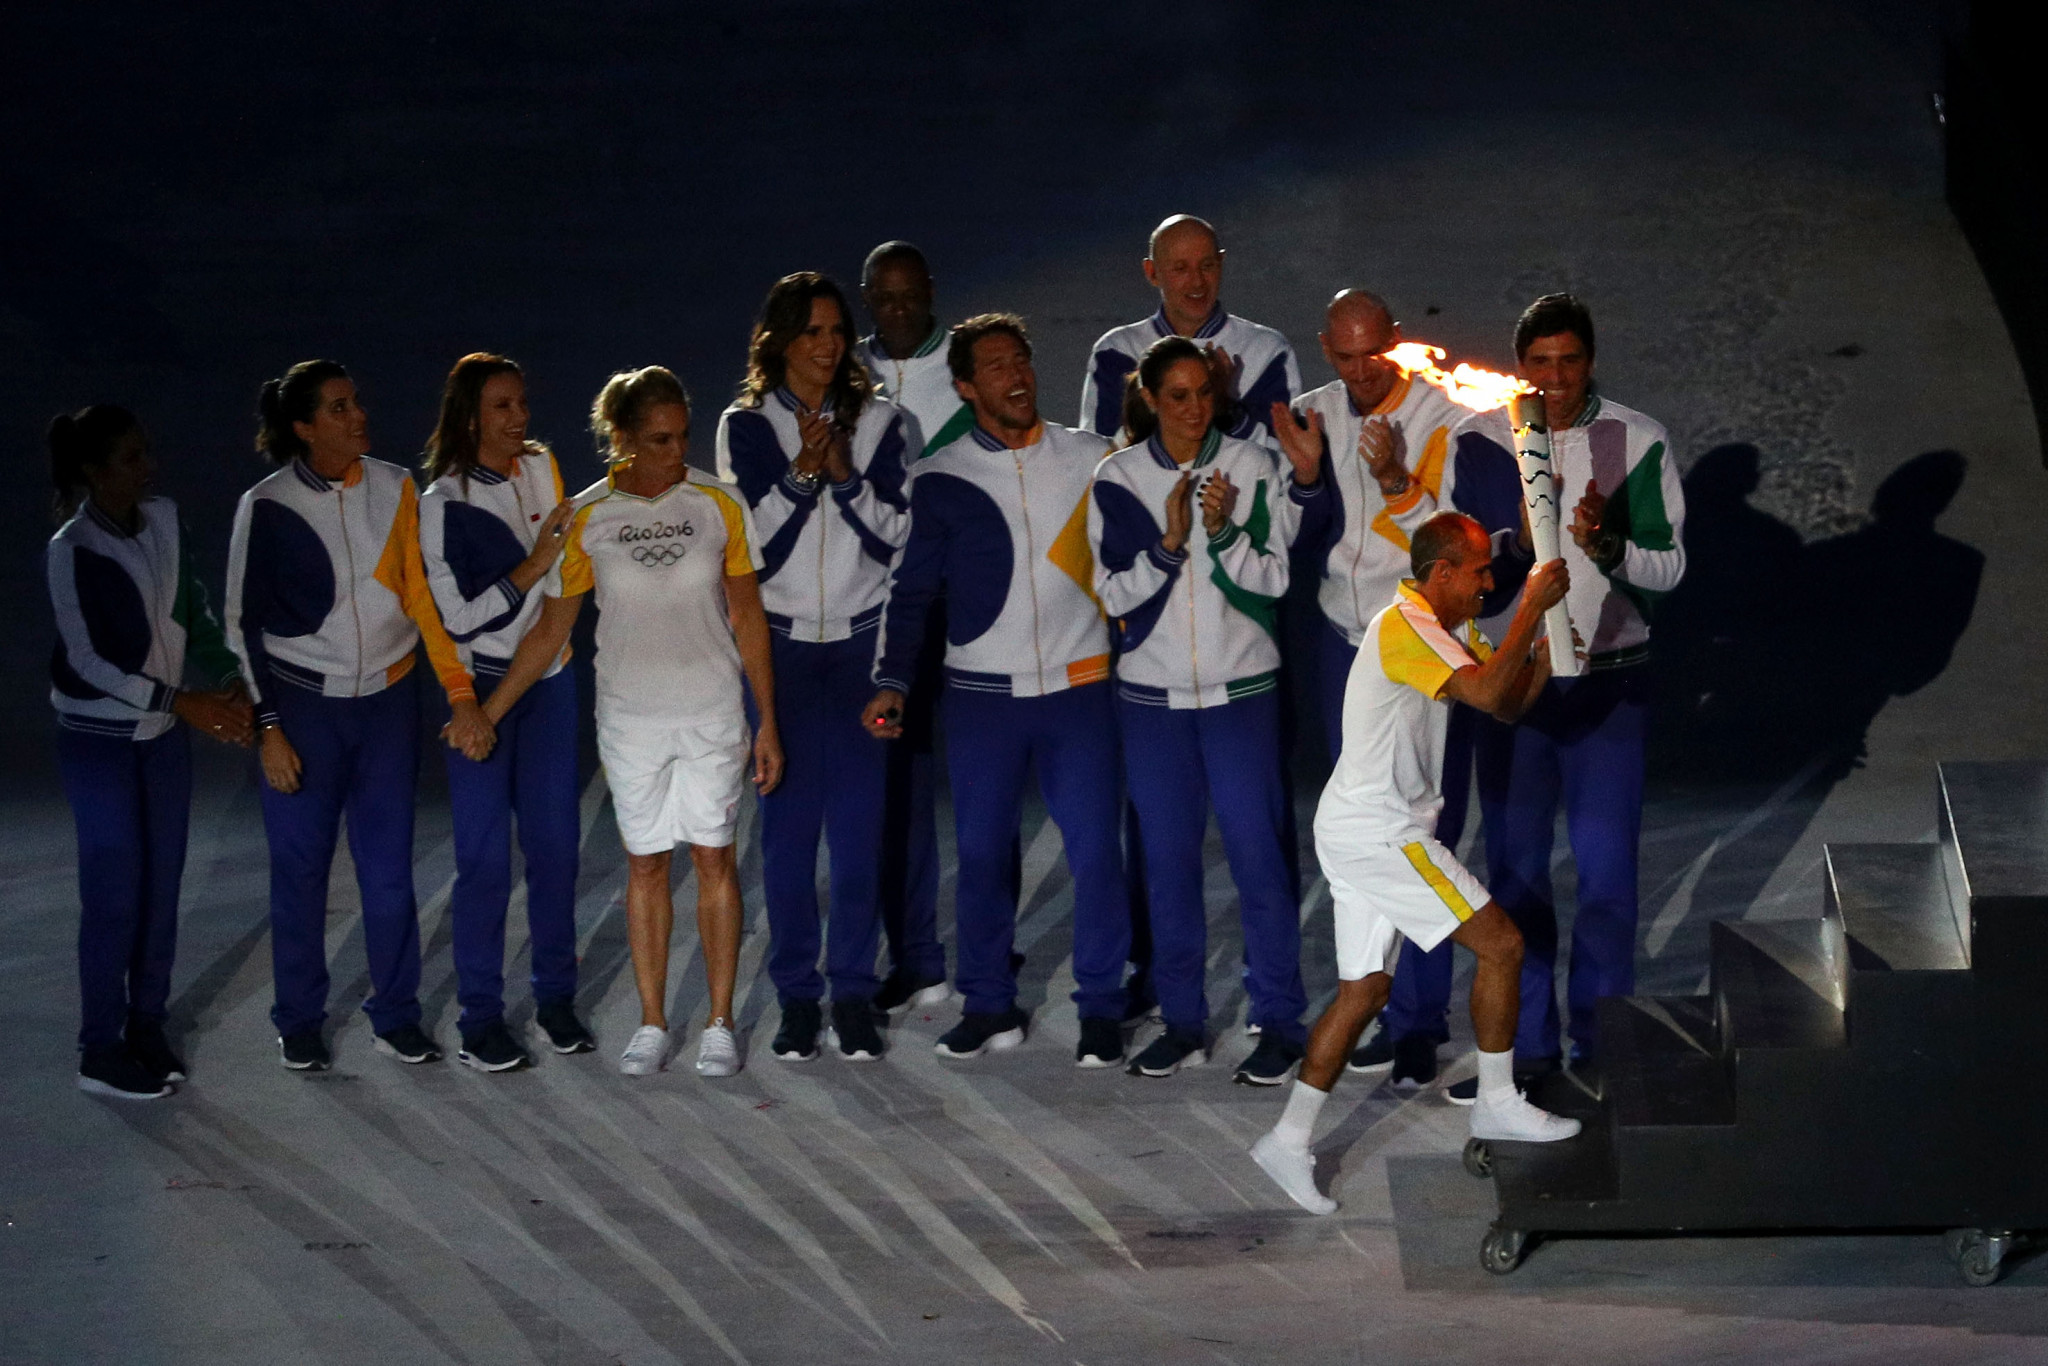 Former Brazilian athlete Vanderlei Cordeiro de Lima lights the Olympic cauldron with the Olympic torch during the opening ceremony of the Rio 2016 Olympic Games ©Getty Images
